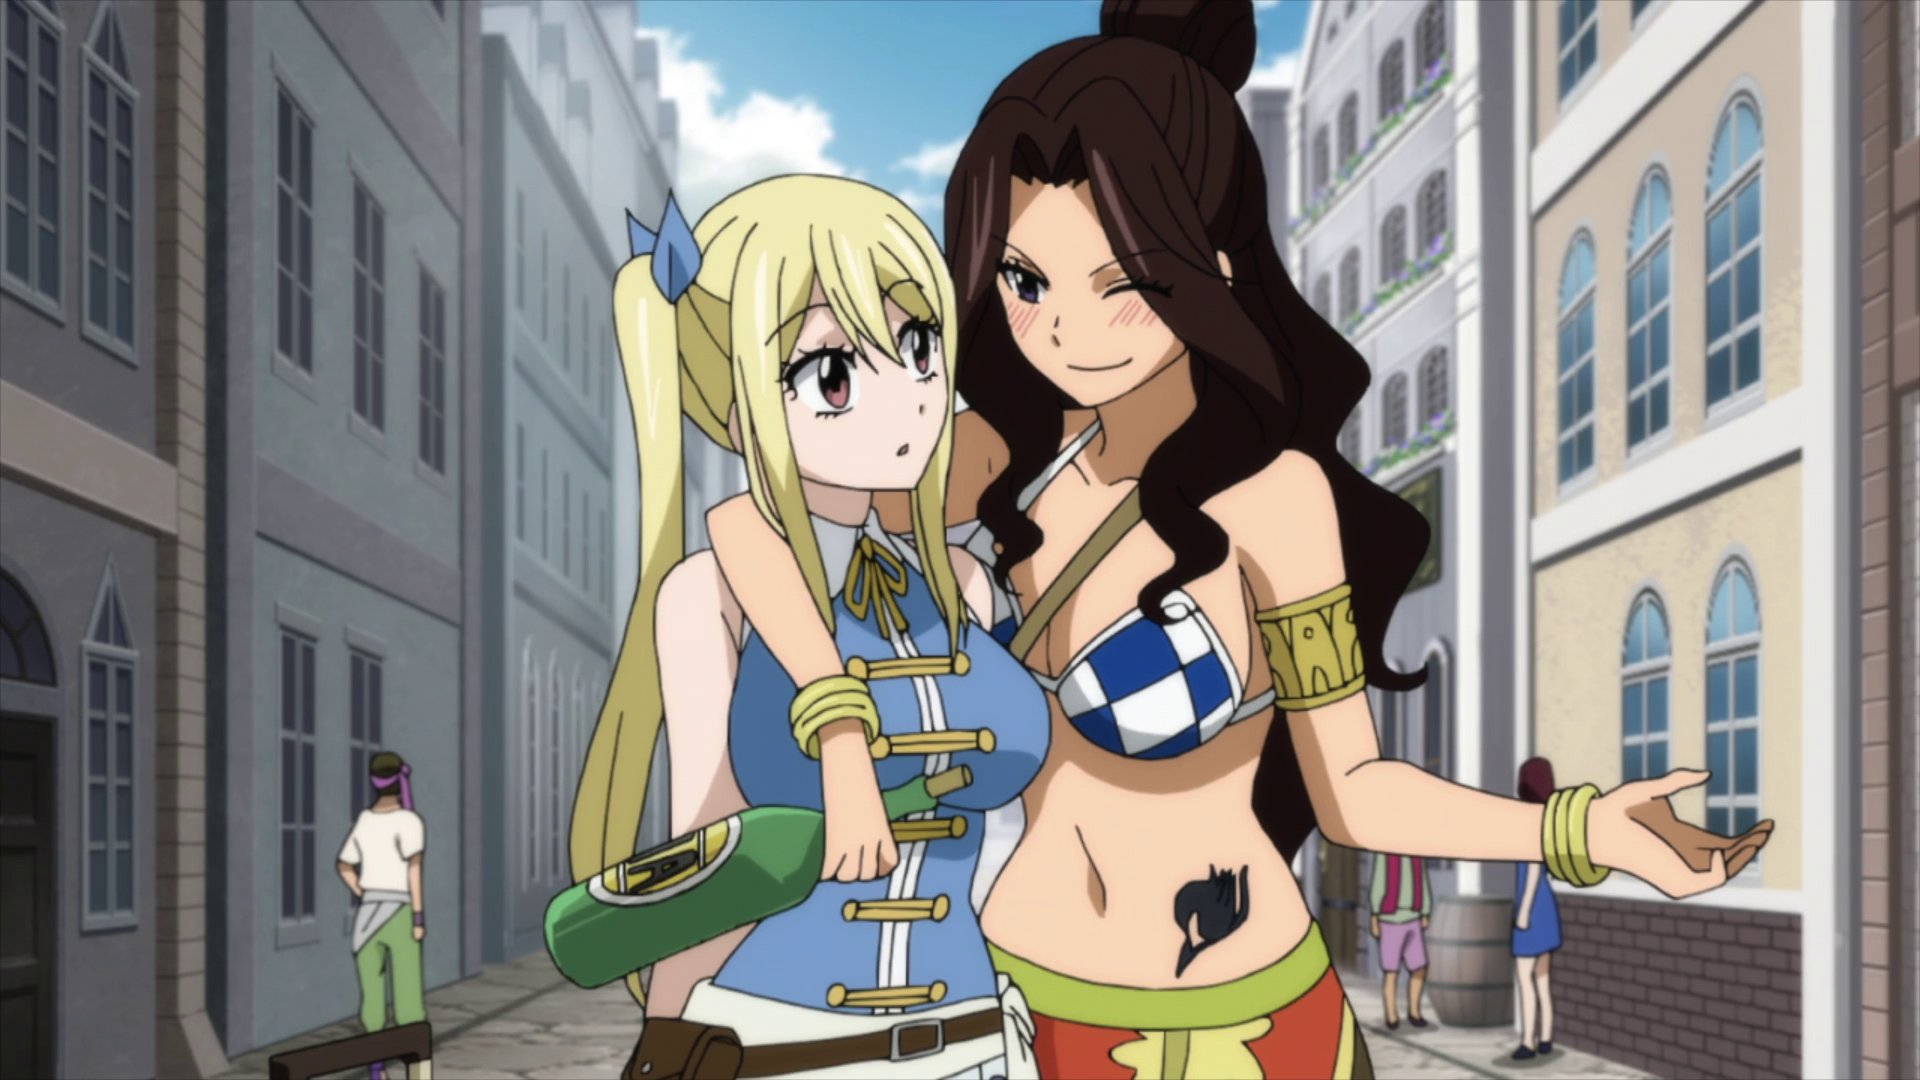 “I watched Fairy tail Episode 284 Lucy Heartfilia Pic set 3” .